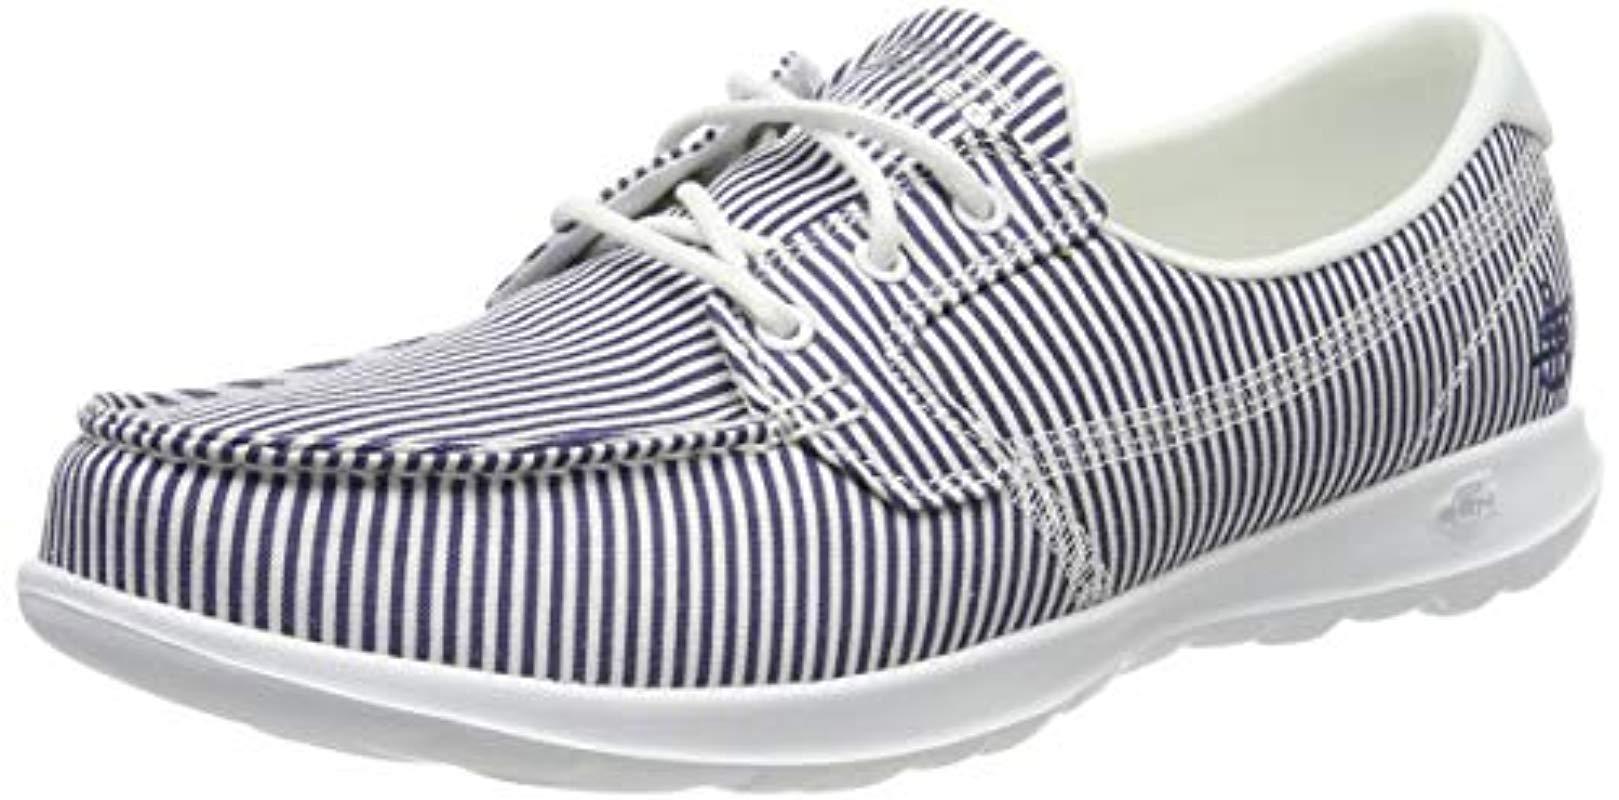 Womens Shoes Flats and flat shoes Lace Up shoes and boots Skechers Canvas Go Walk Lite Caribbean Boat Shoes in Blue 